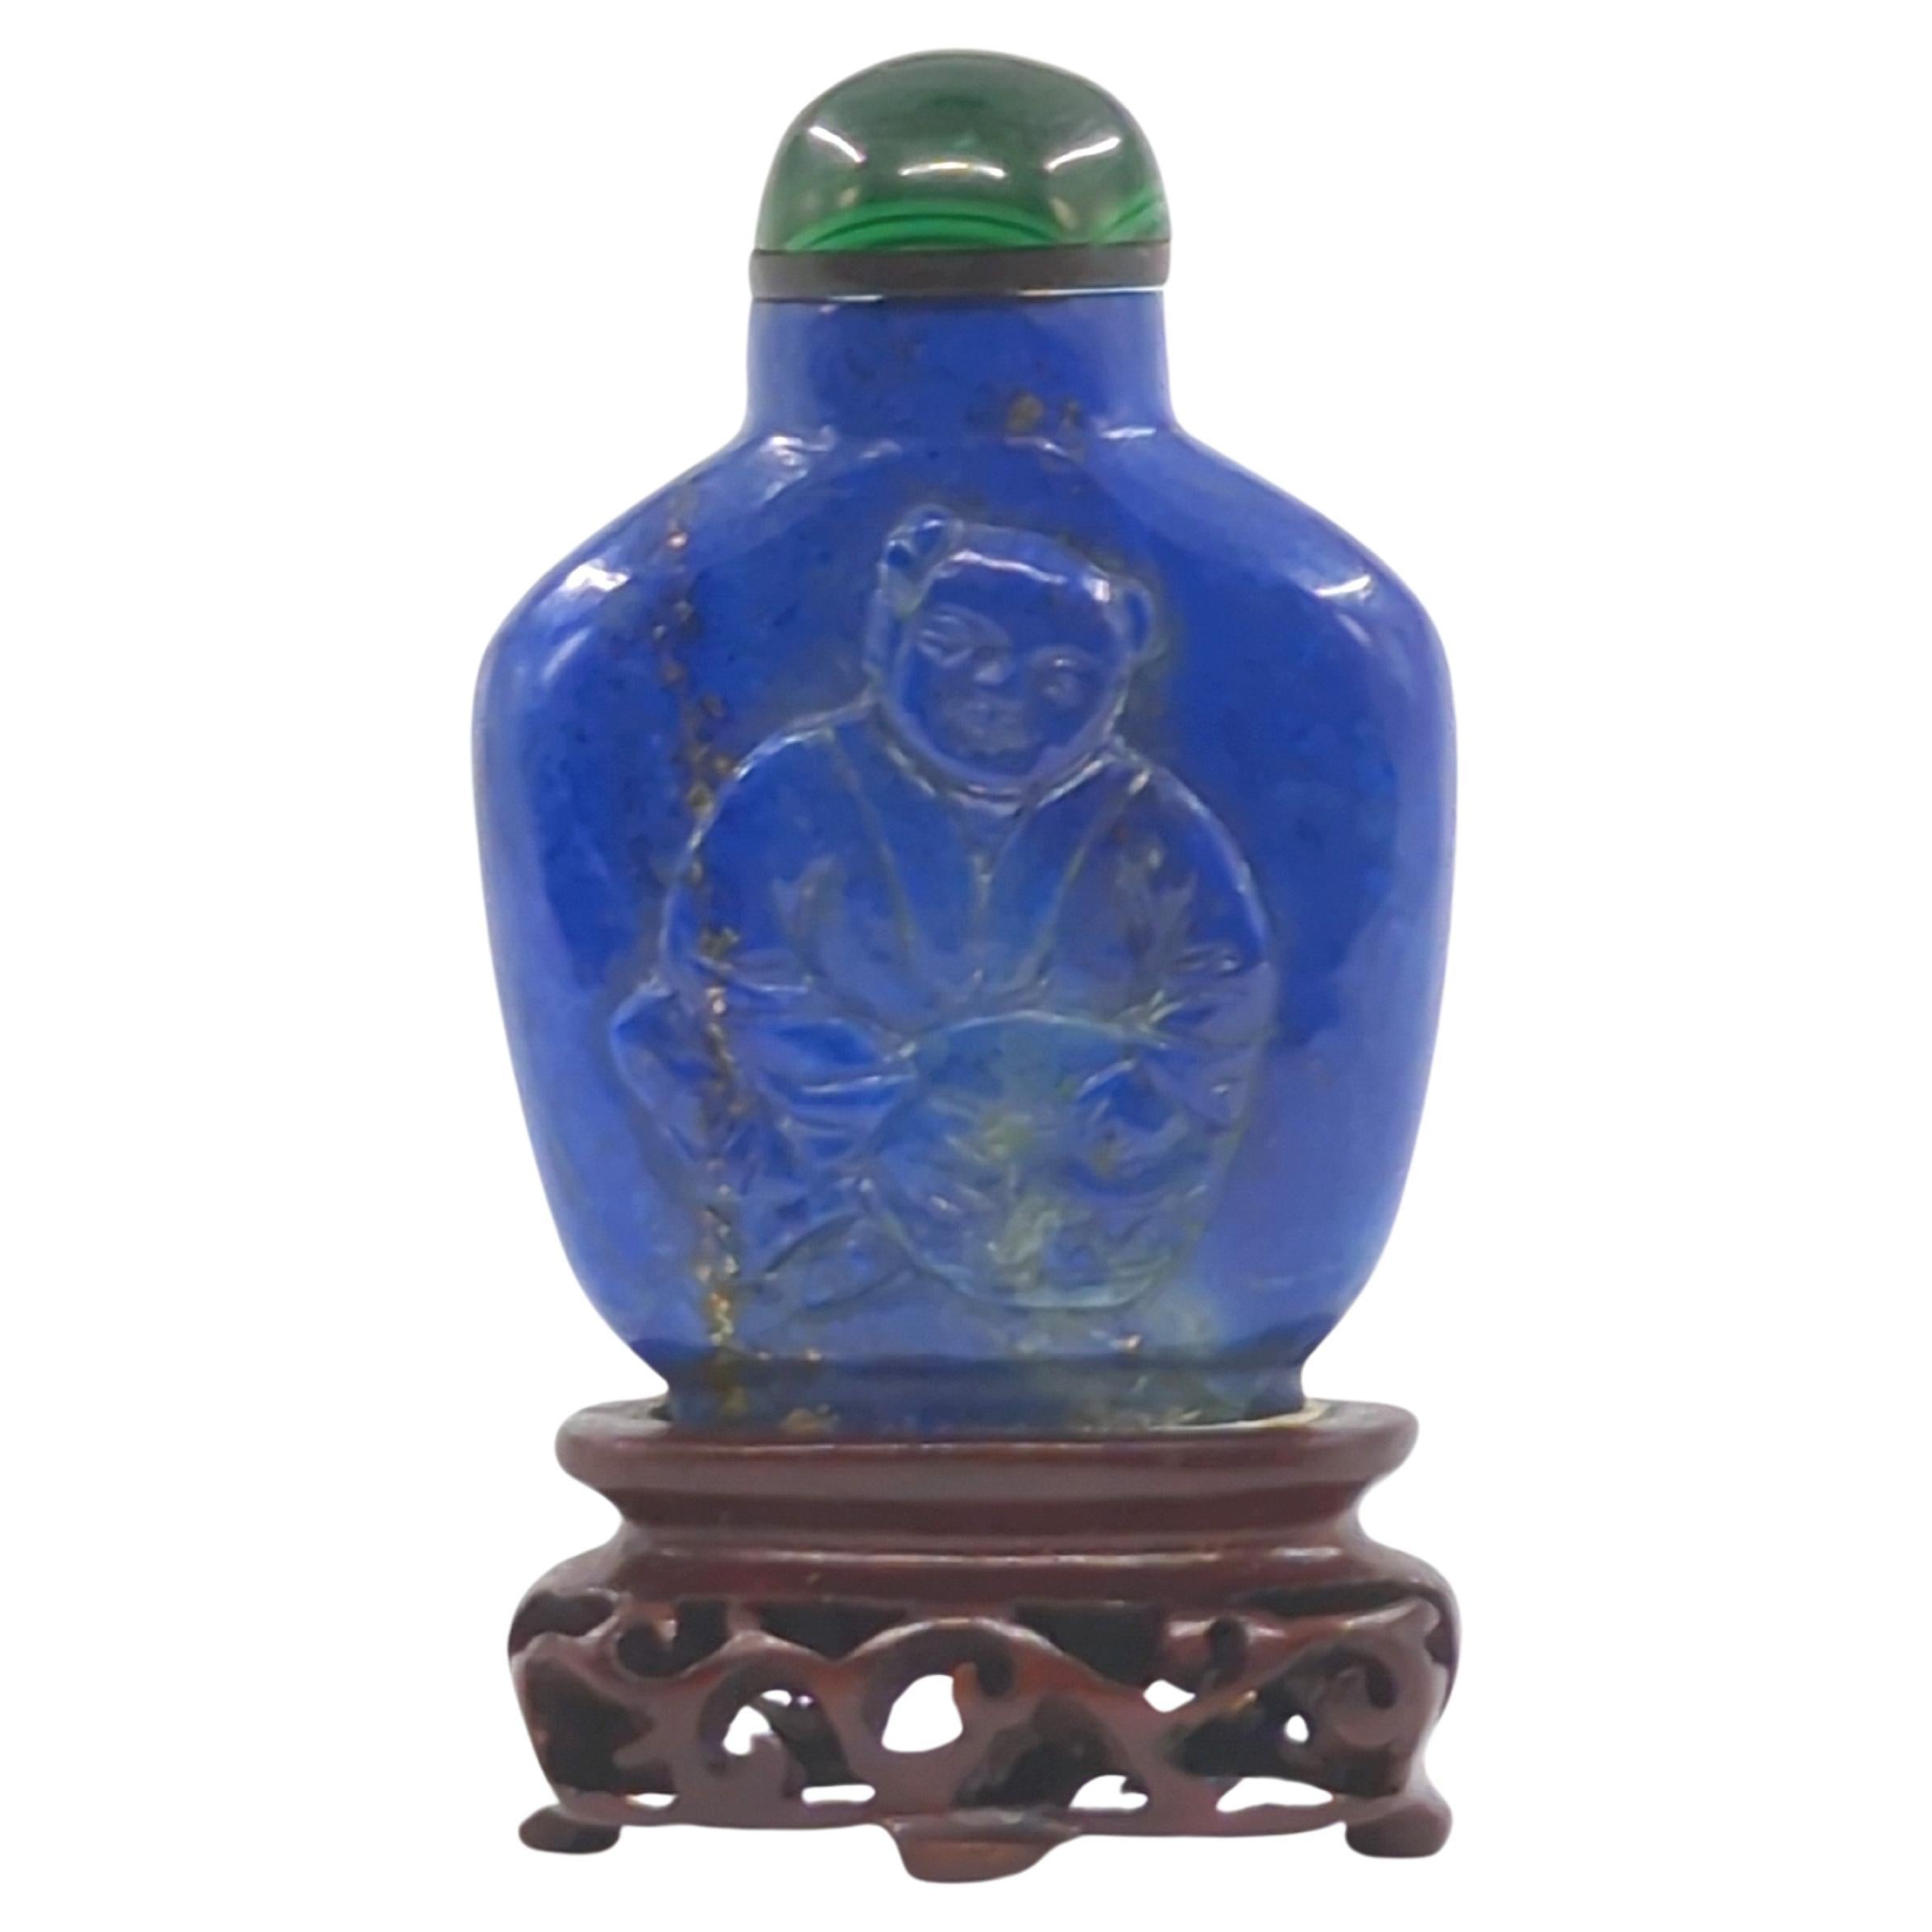 Antique Chinese Lapis Lazuli Relief Carved Snuff Bottle on Stand c.1920 For Sale